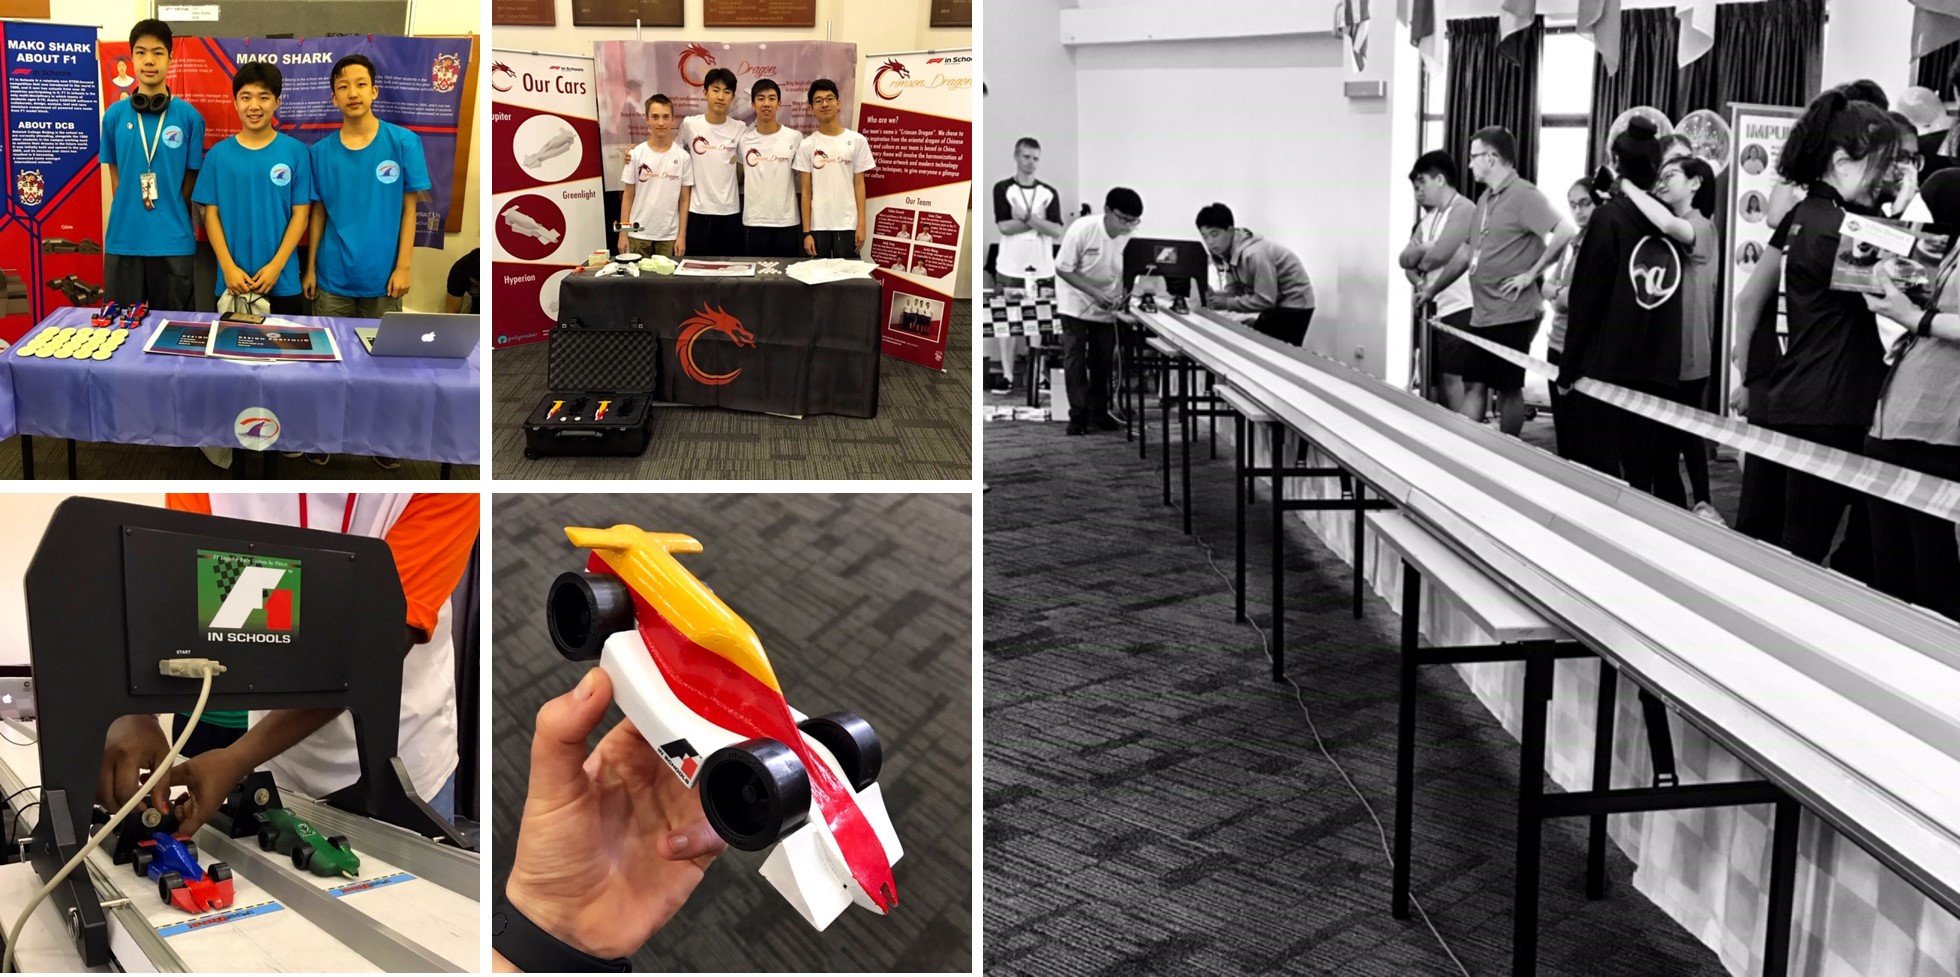 DCB STEM Students in South East Asia F1 in Schools